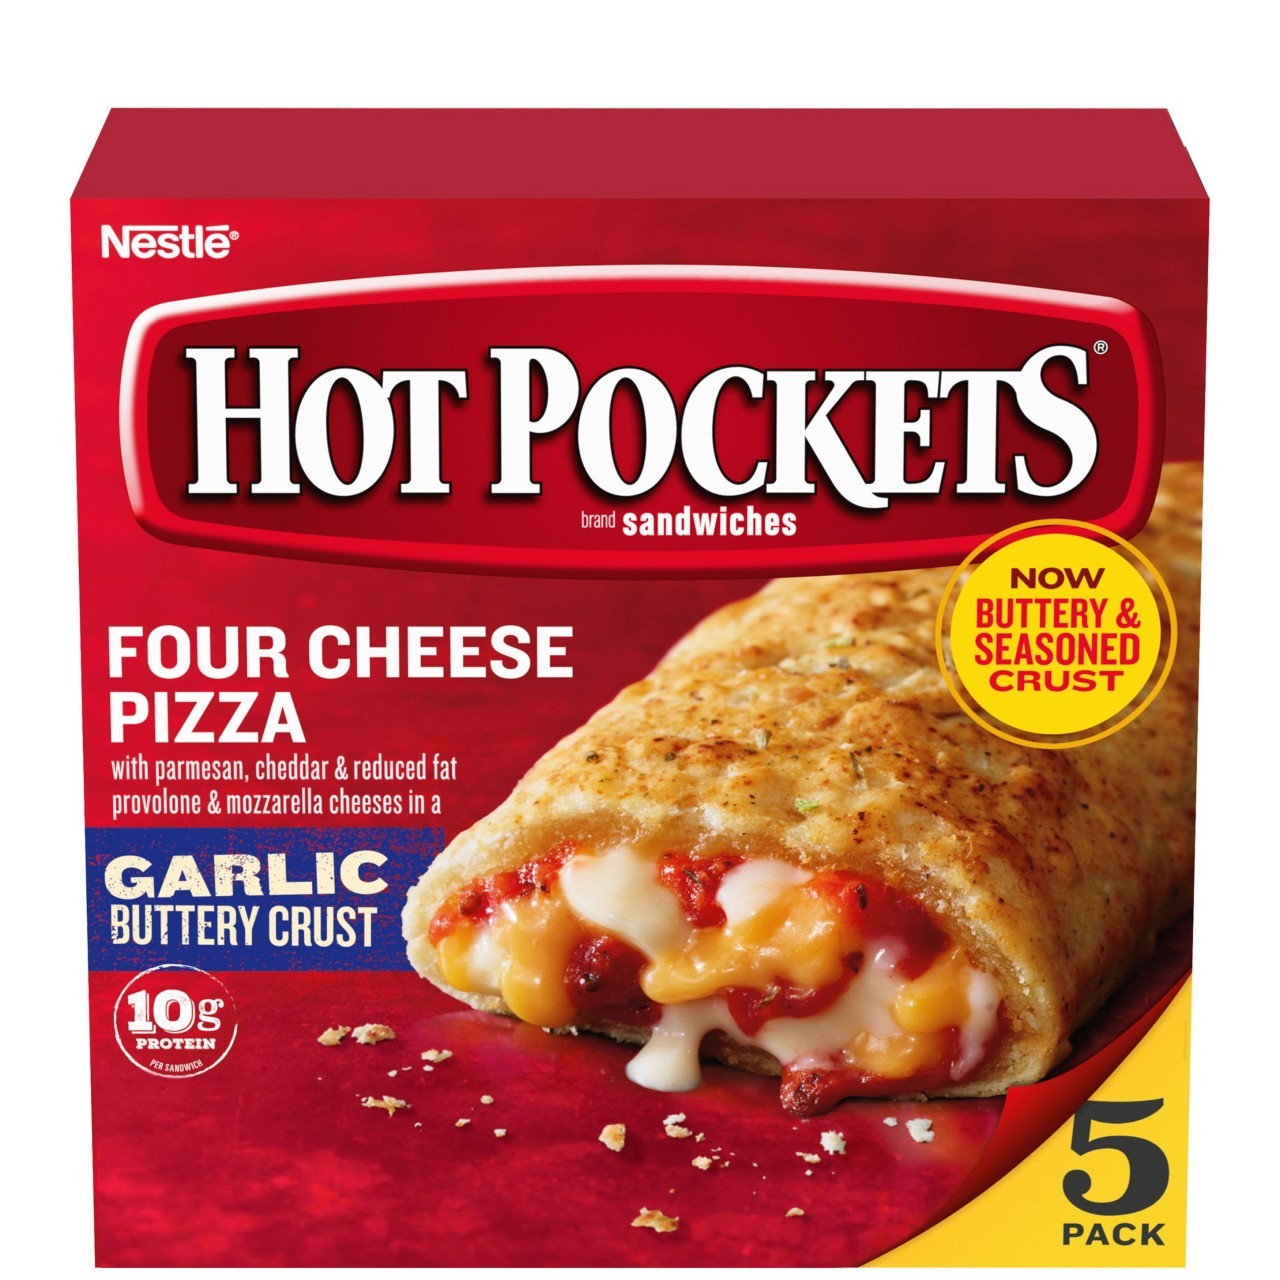 HOT POCKET FOUR CHEESE PIZZA 8.5oz